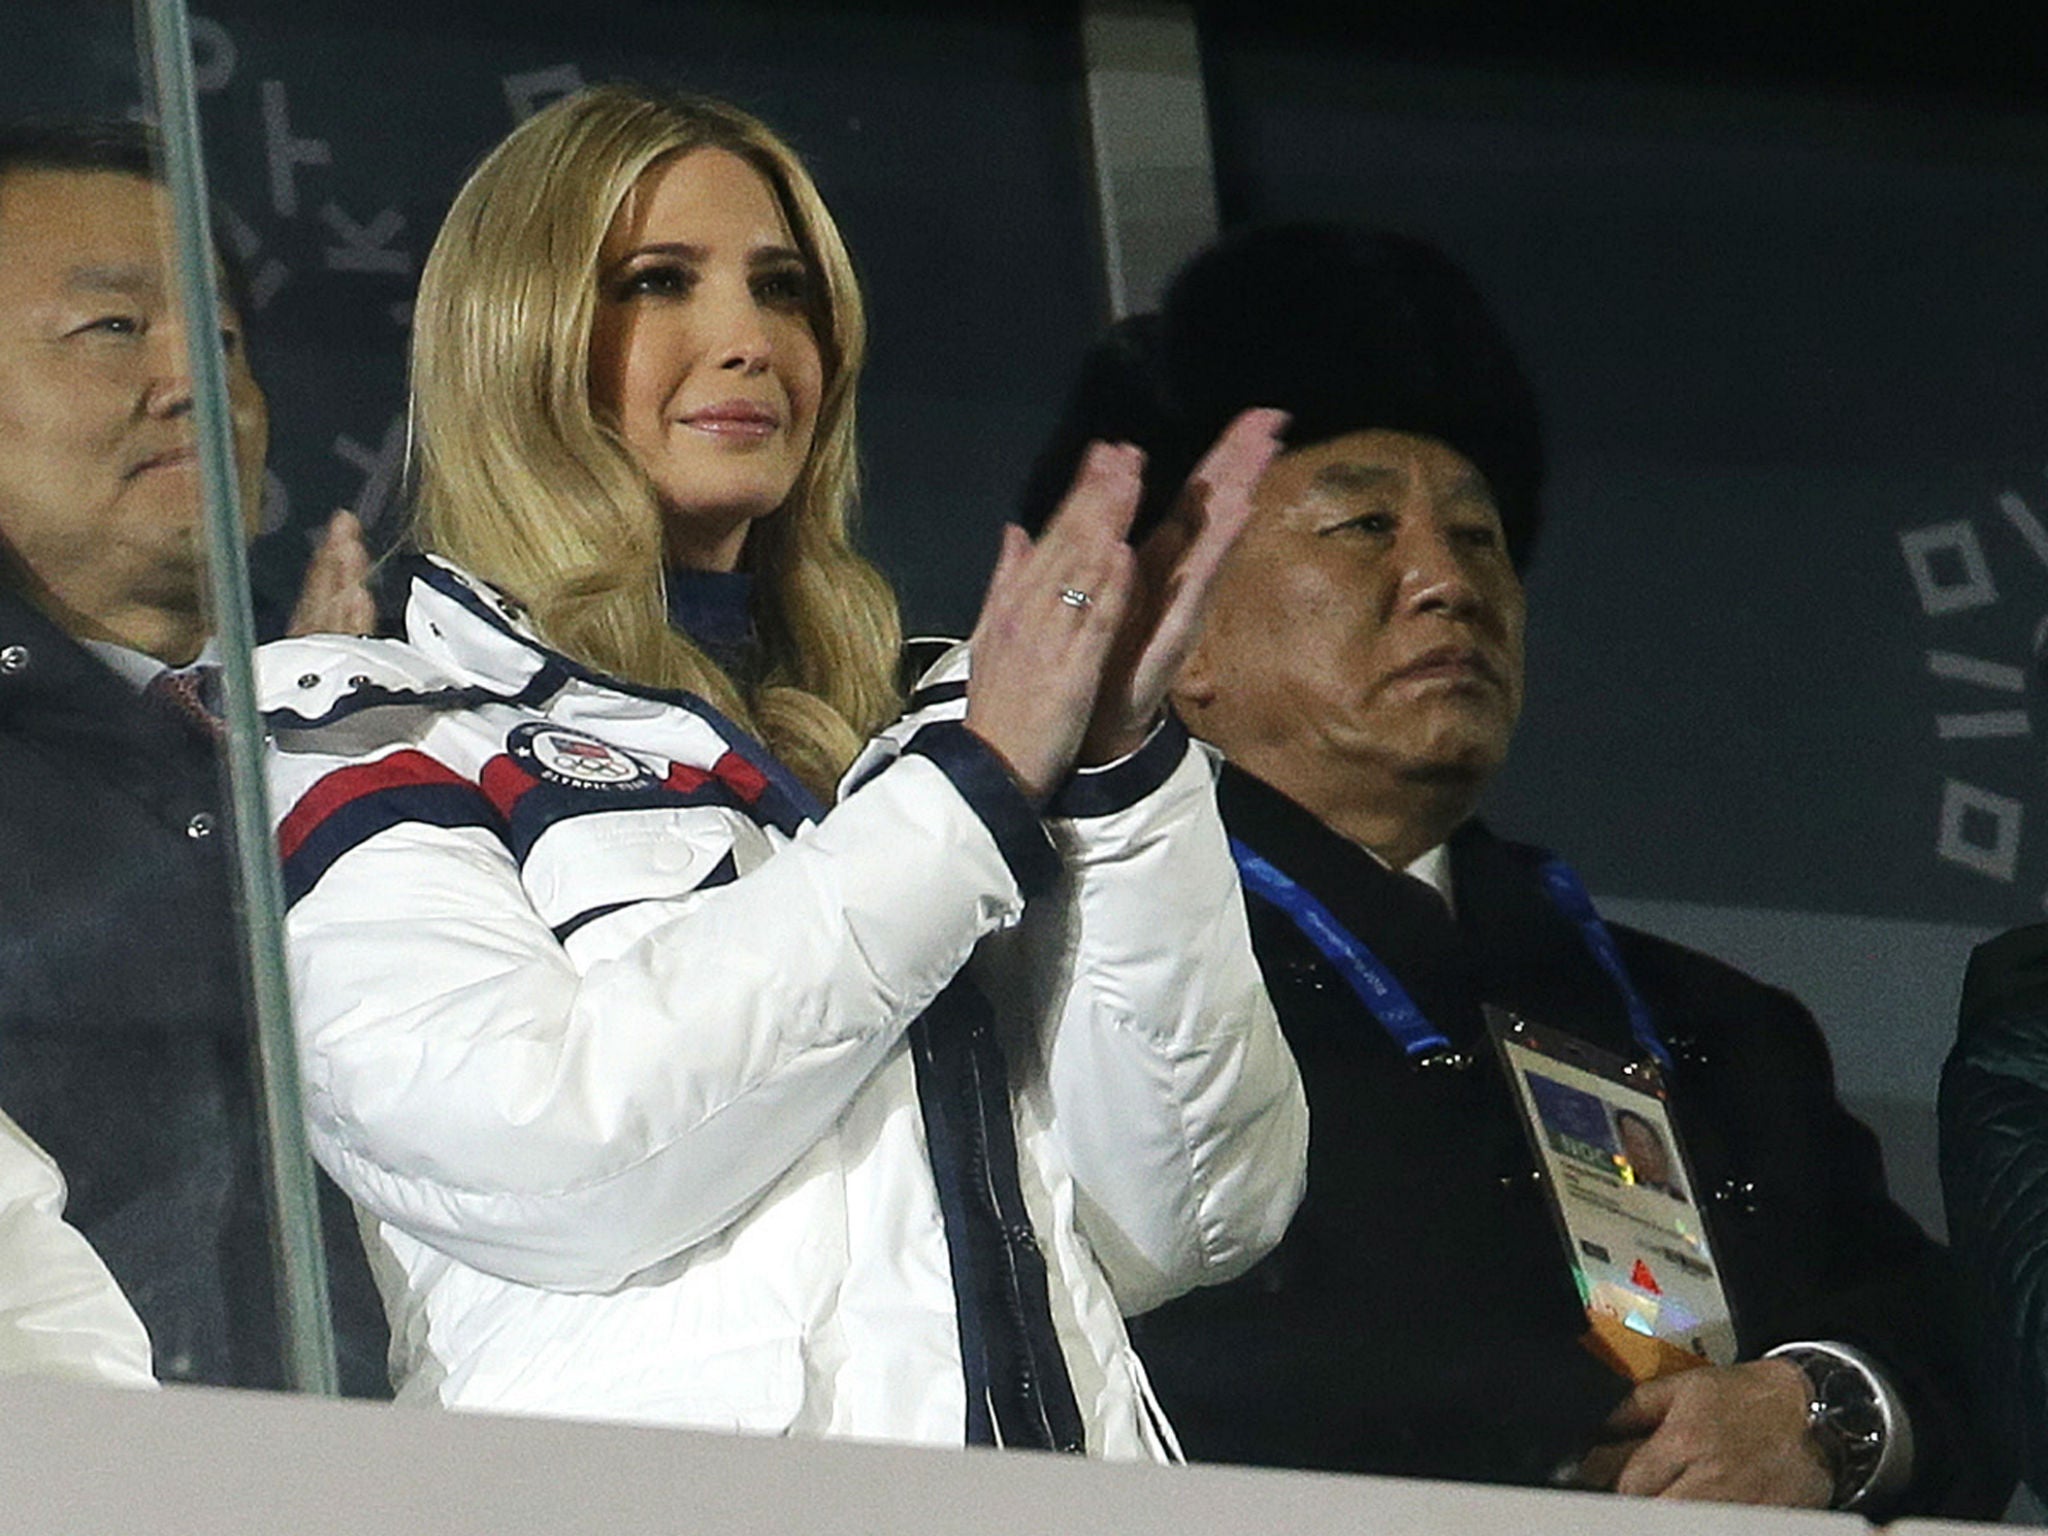 President Donald Trump's daughter, Ivanka, attends the closing ceremony of the 2018 Winter Olympics in Pyeongchang. On the right is Kim Yong Chol, vice chairman of North Korea's ruling Workers' Party Central Committee